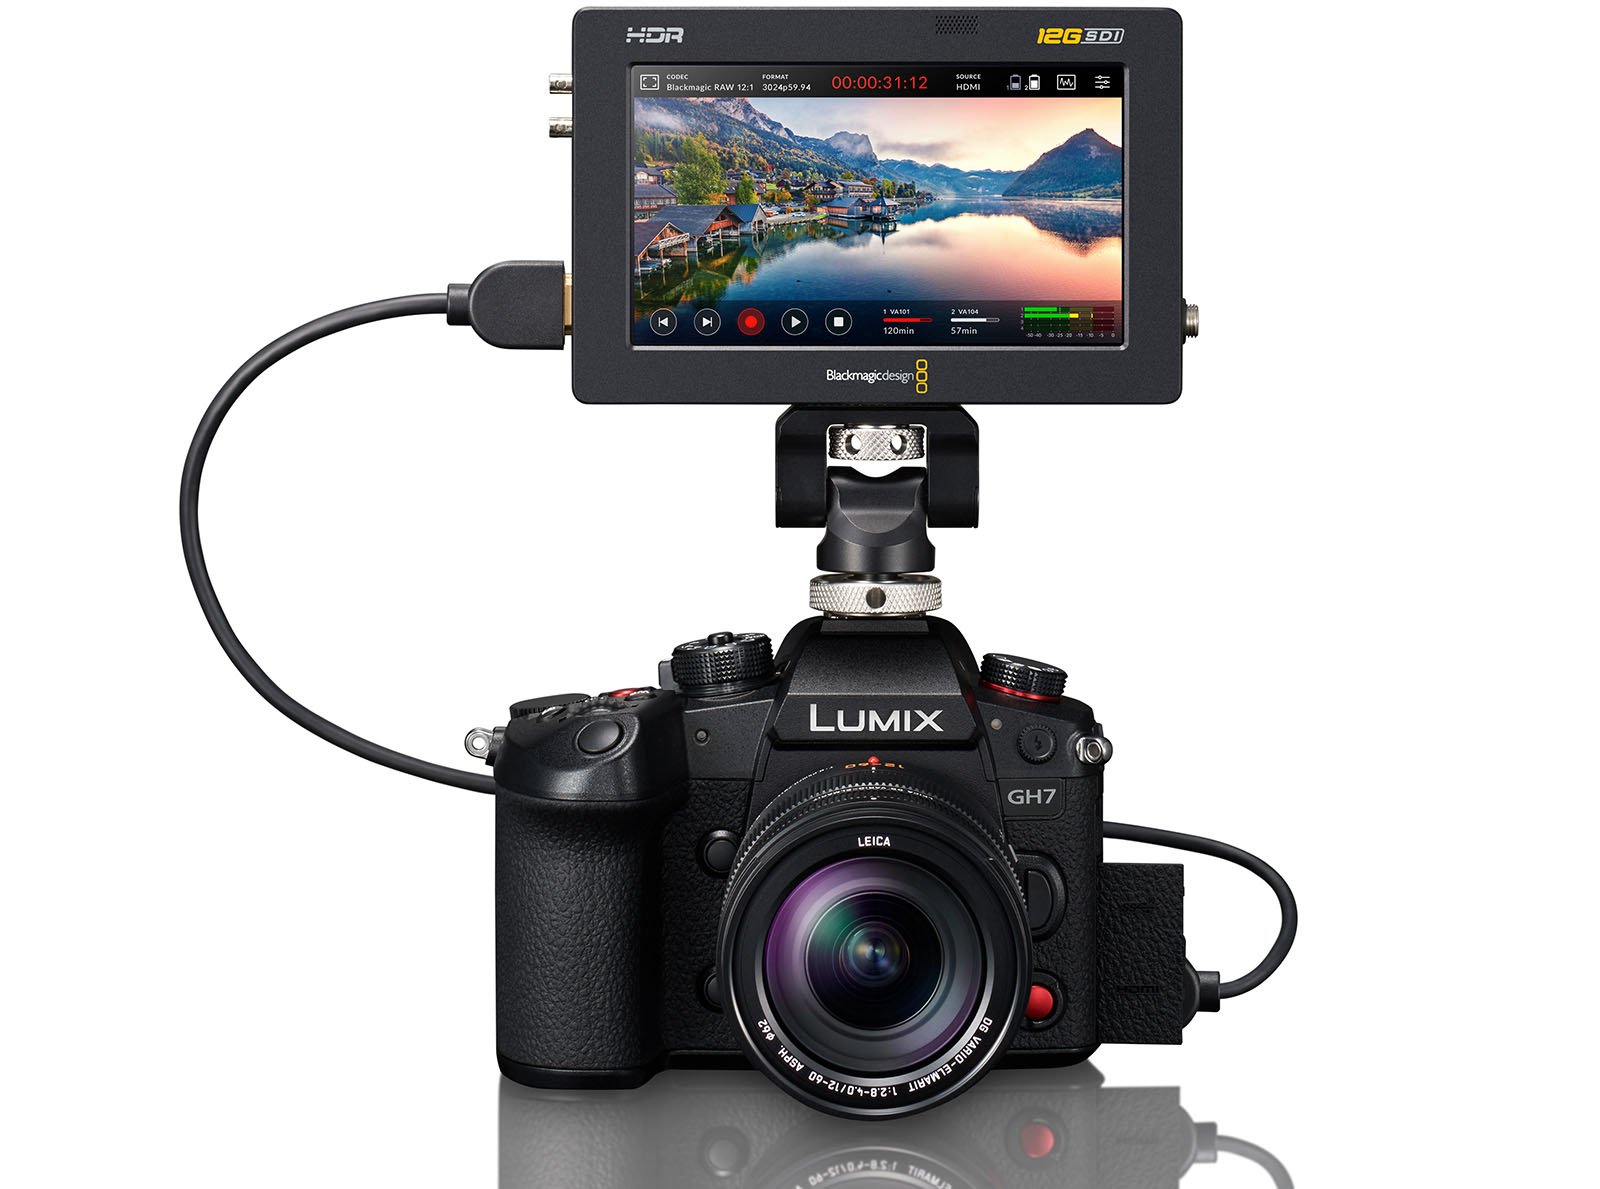 A Lumix GH7 camera is outfitted with a Leica lens. Mounted on top of the camera is a Blackmagic Design HDR screen displaying a vibrant landscape scene, connected via a cable. The setup appears to be configured for professional video recording or photography.